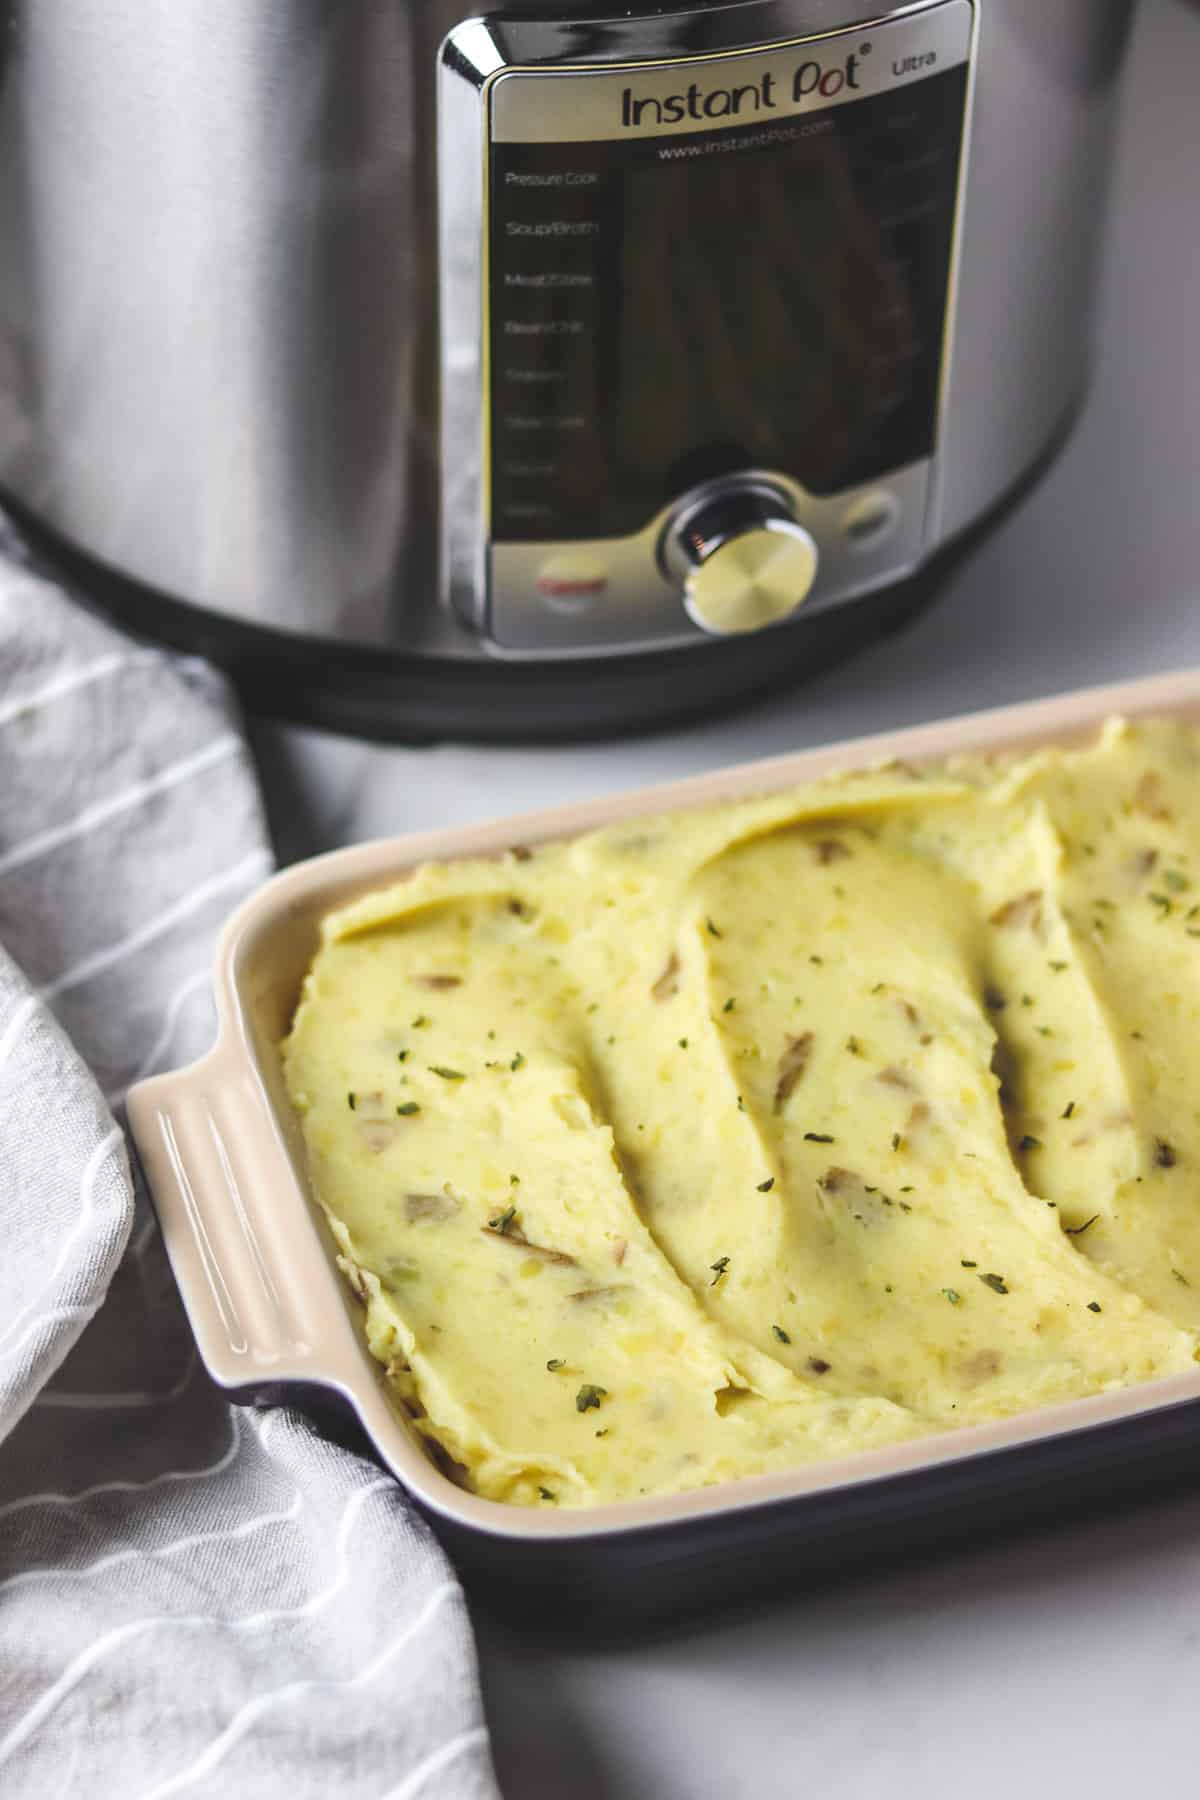 pan of mashed potatoes in front of an instant pot